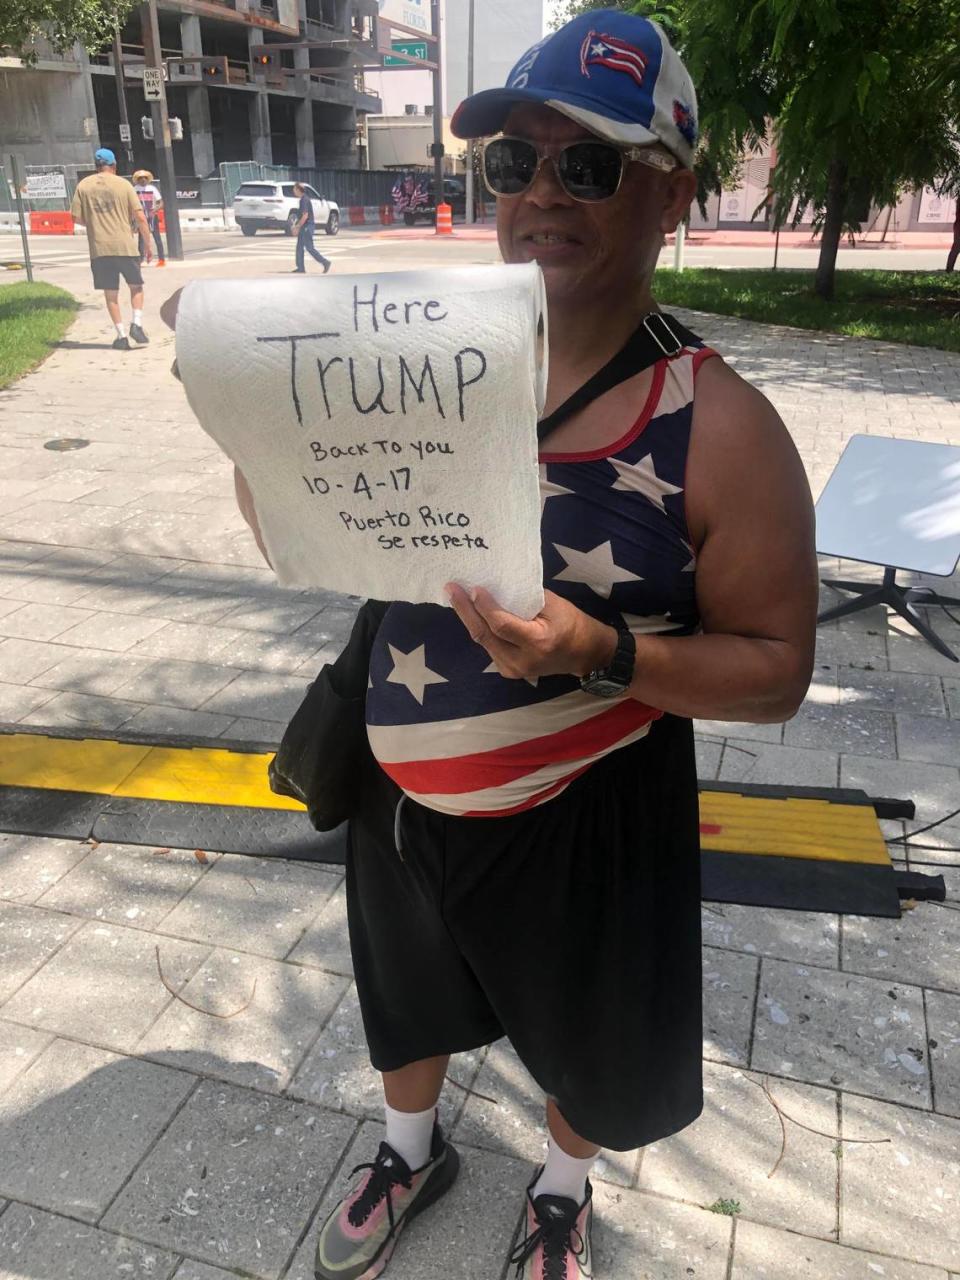 Remigio Echevarria, a 52-year-old handyman from Añasco, Puerto Rico, hands paper towels outside the federal courthouse, a nod to the time President Trump famously tossed rolls to a crowd in San Juan in October 2017 after Hurricane Maria devastated the island. One towel reads, “Here Trump, back to you. Puerto Rico respects itself.”